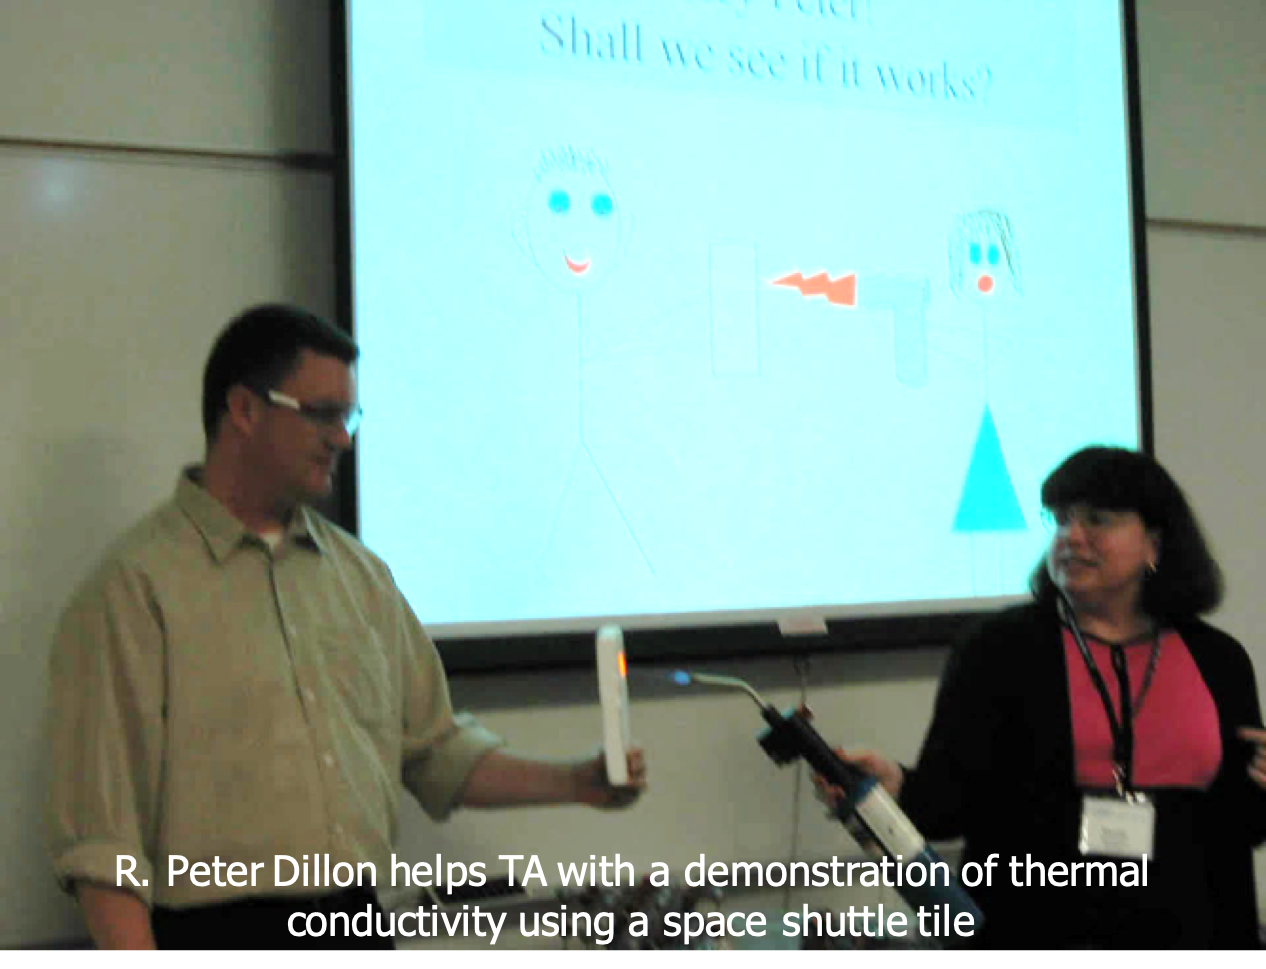 R. Peter Dillon helps TA with a demonstration of thermal conductivity using a space shuttle tile